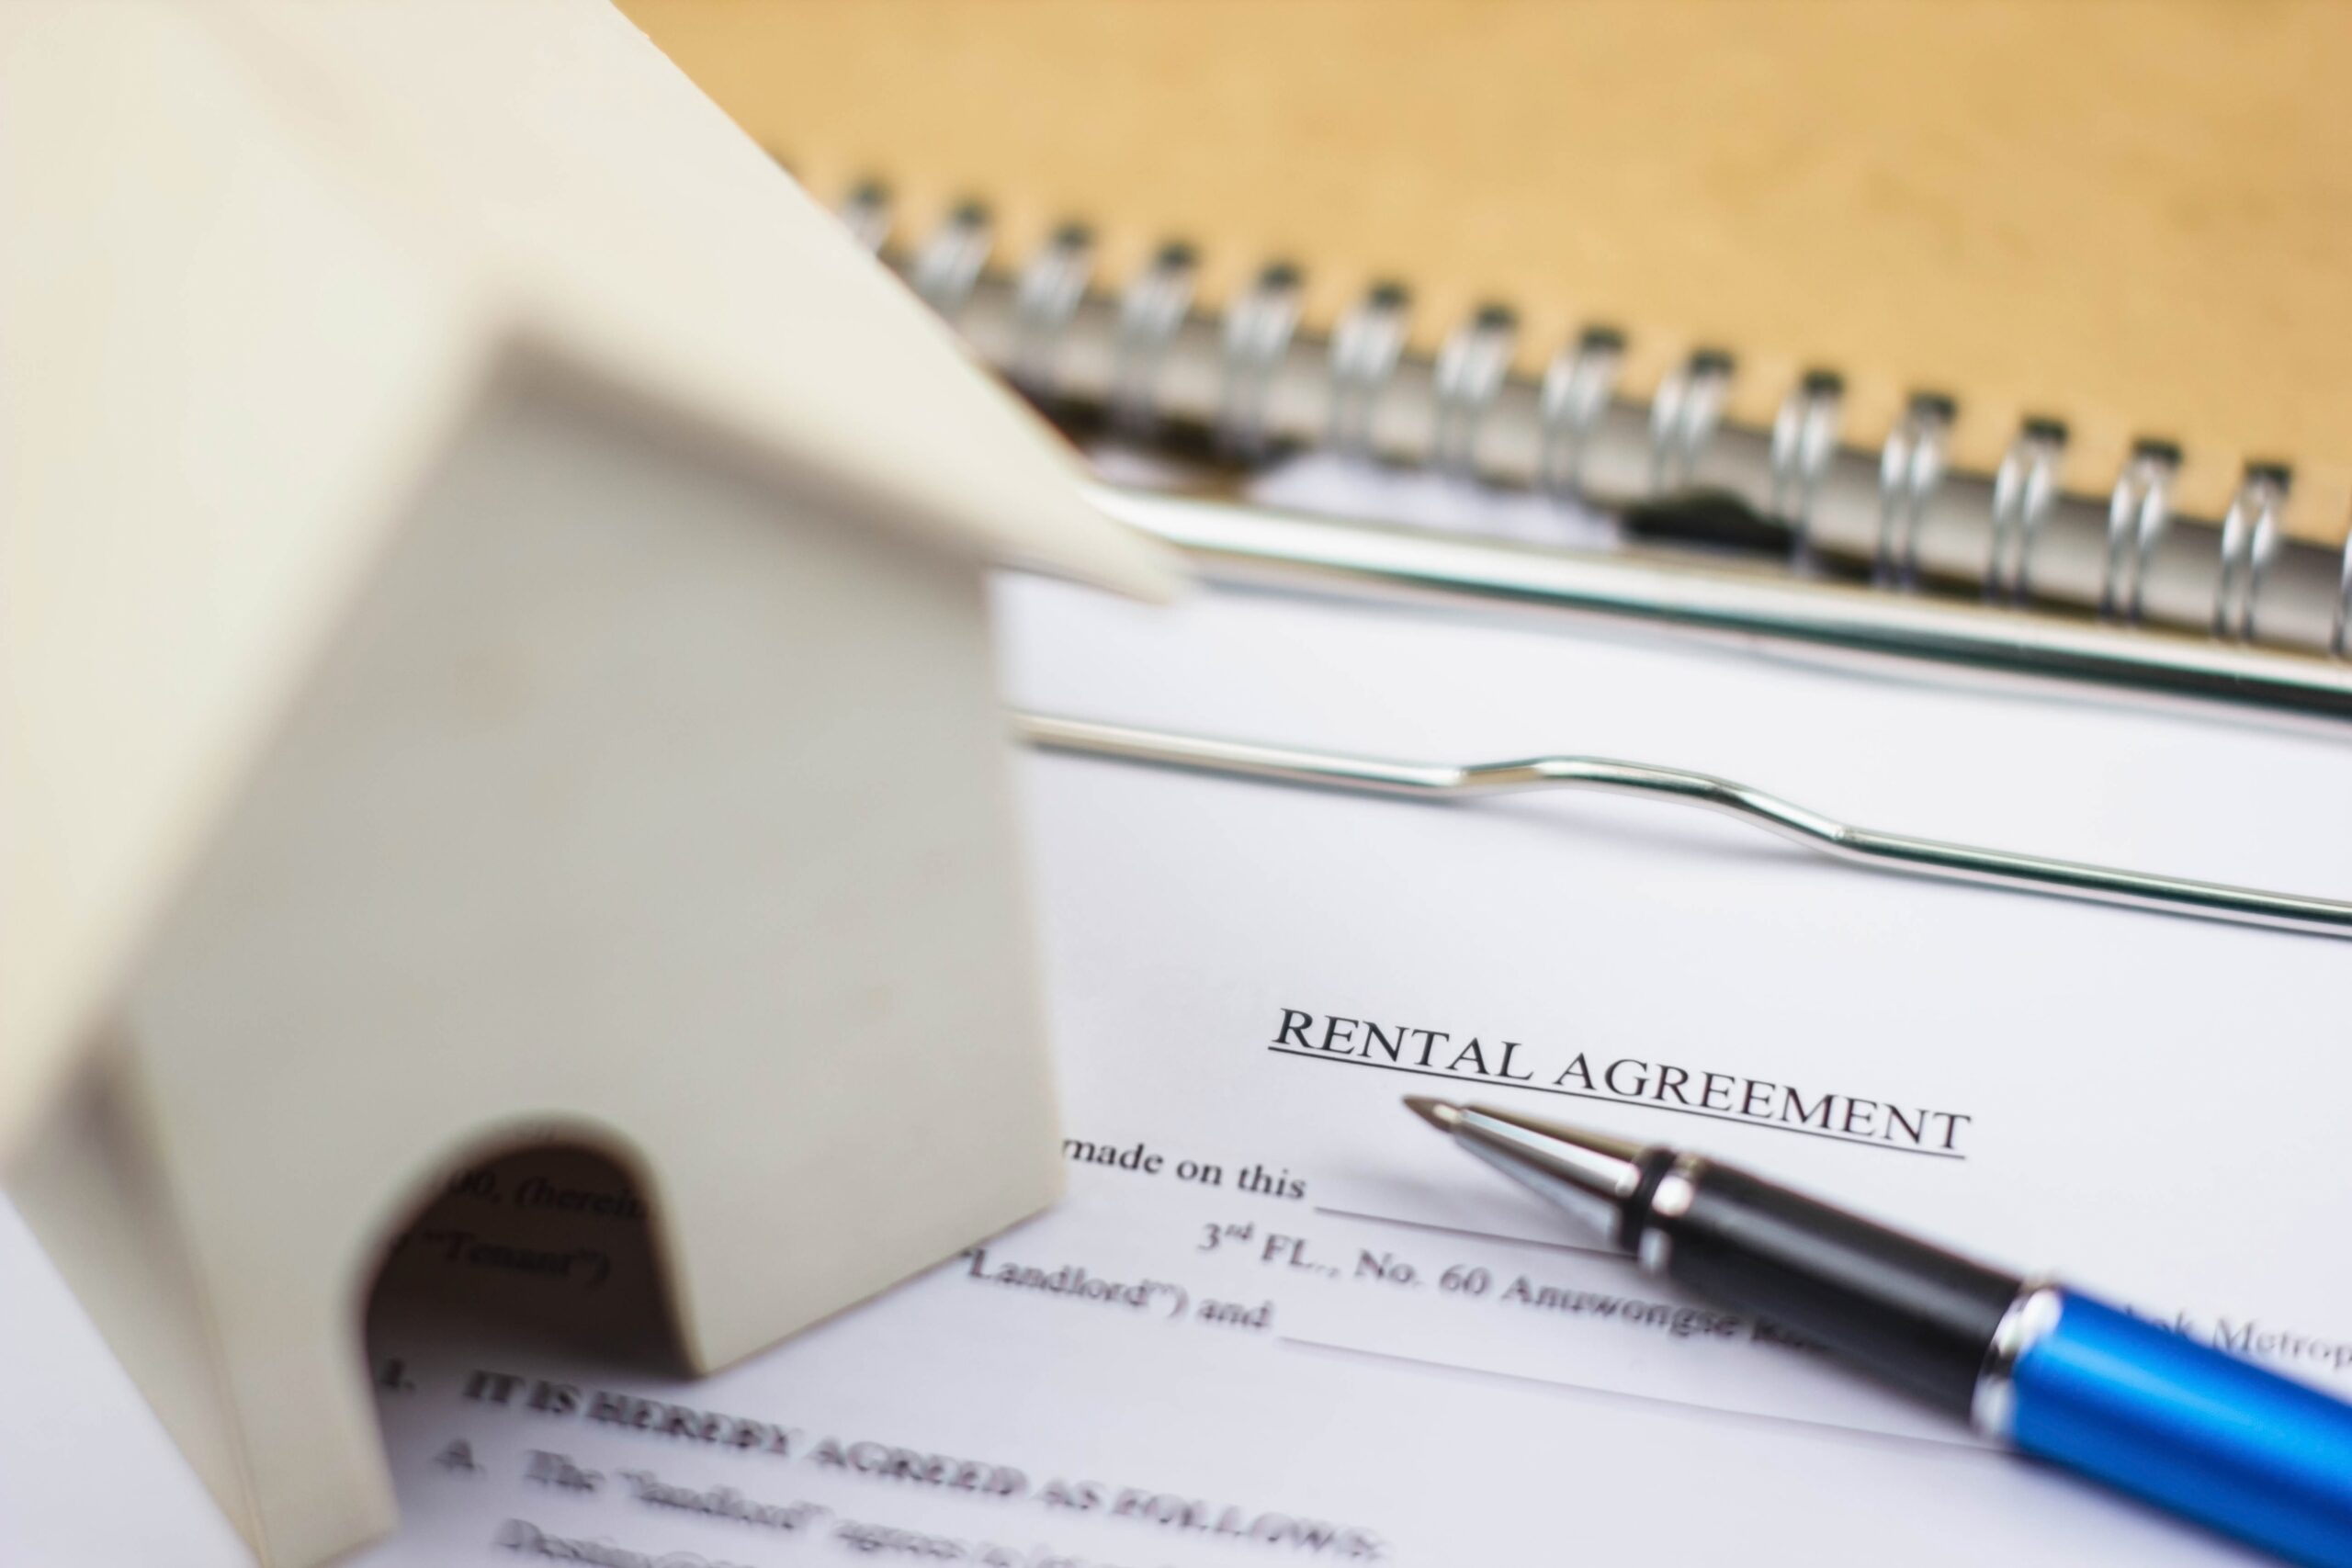 Home model and rental agreement document with pen